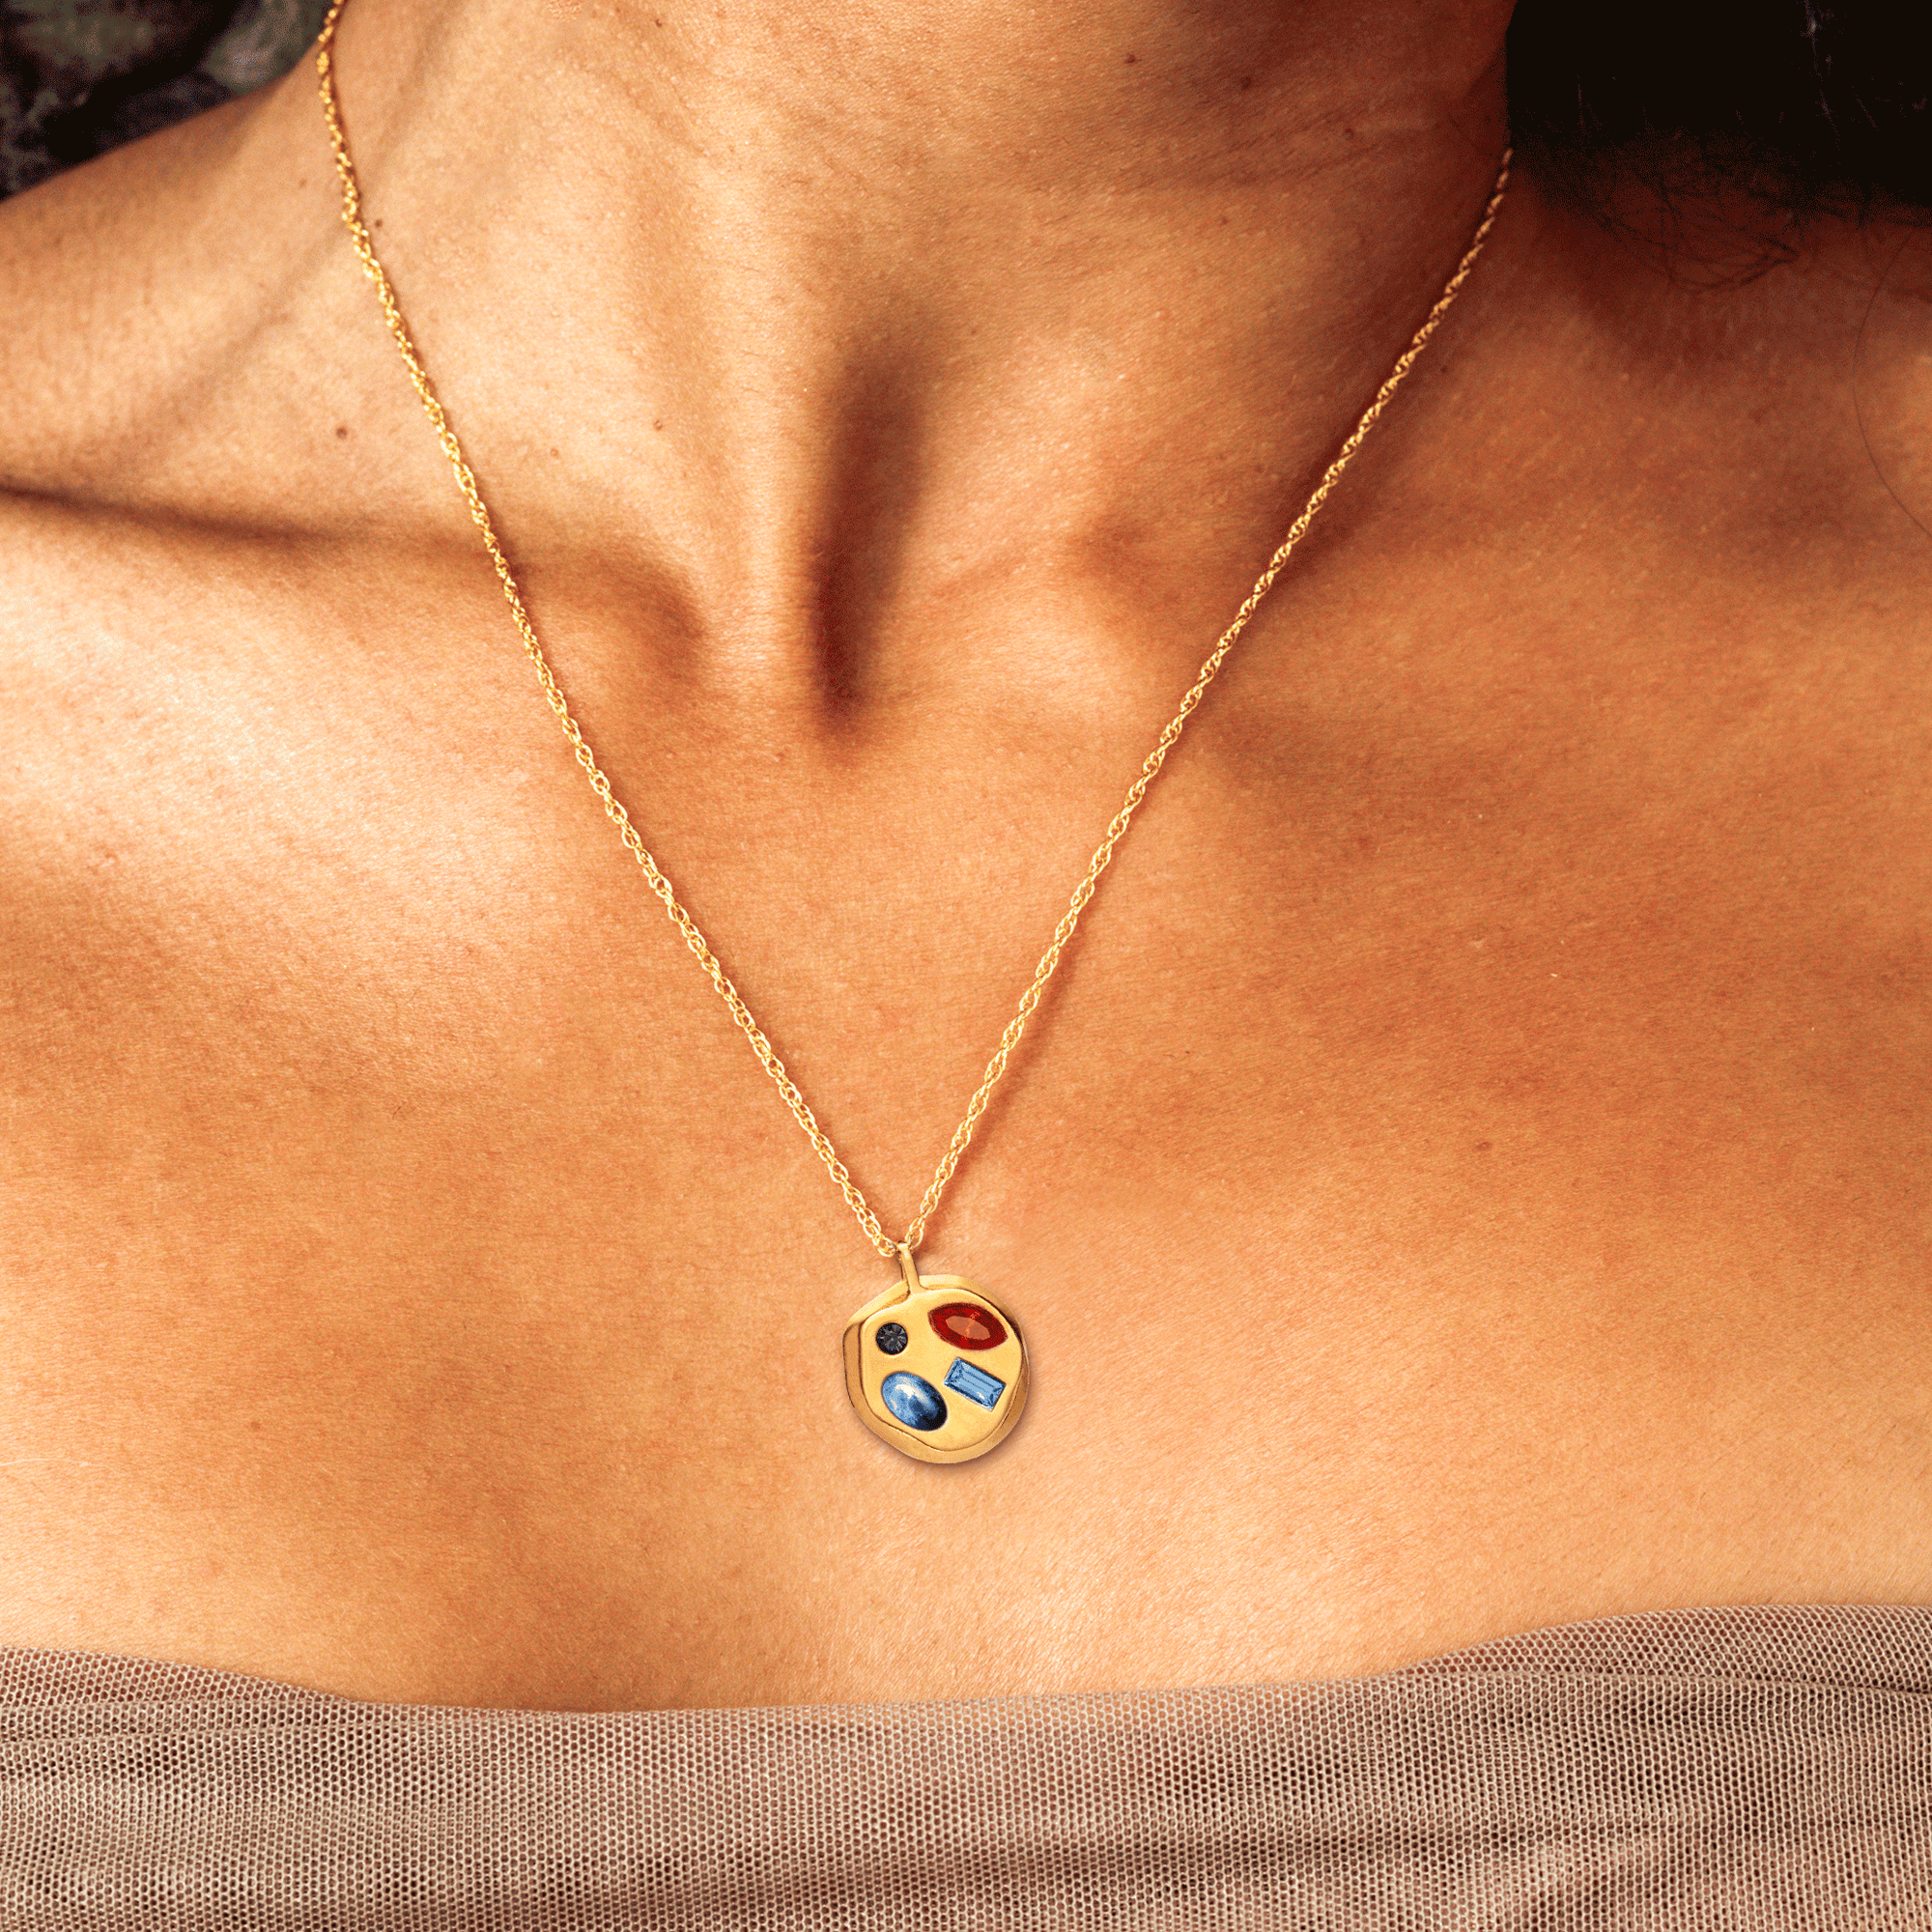 Person wearing The July Thirteenth Pendant